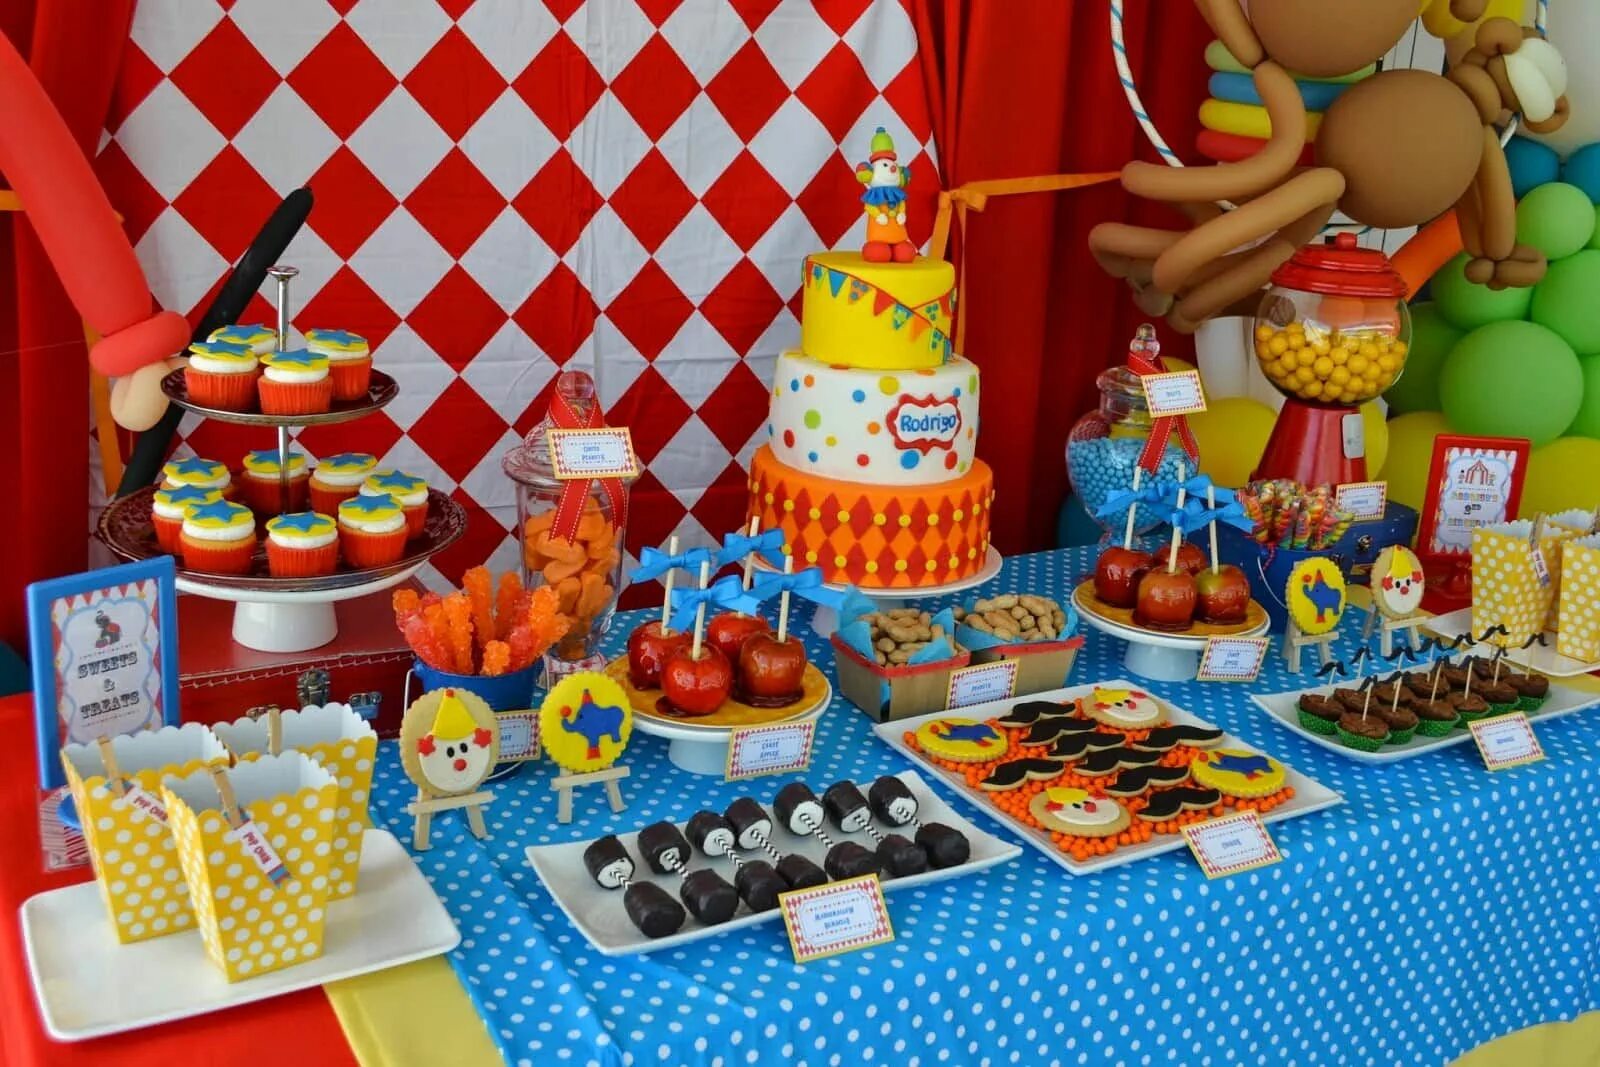 The Birthday Party. Birthday Party activities. Birthday Party ideas. Boy Birthday Party. Birthday activities